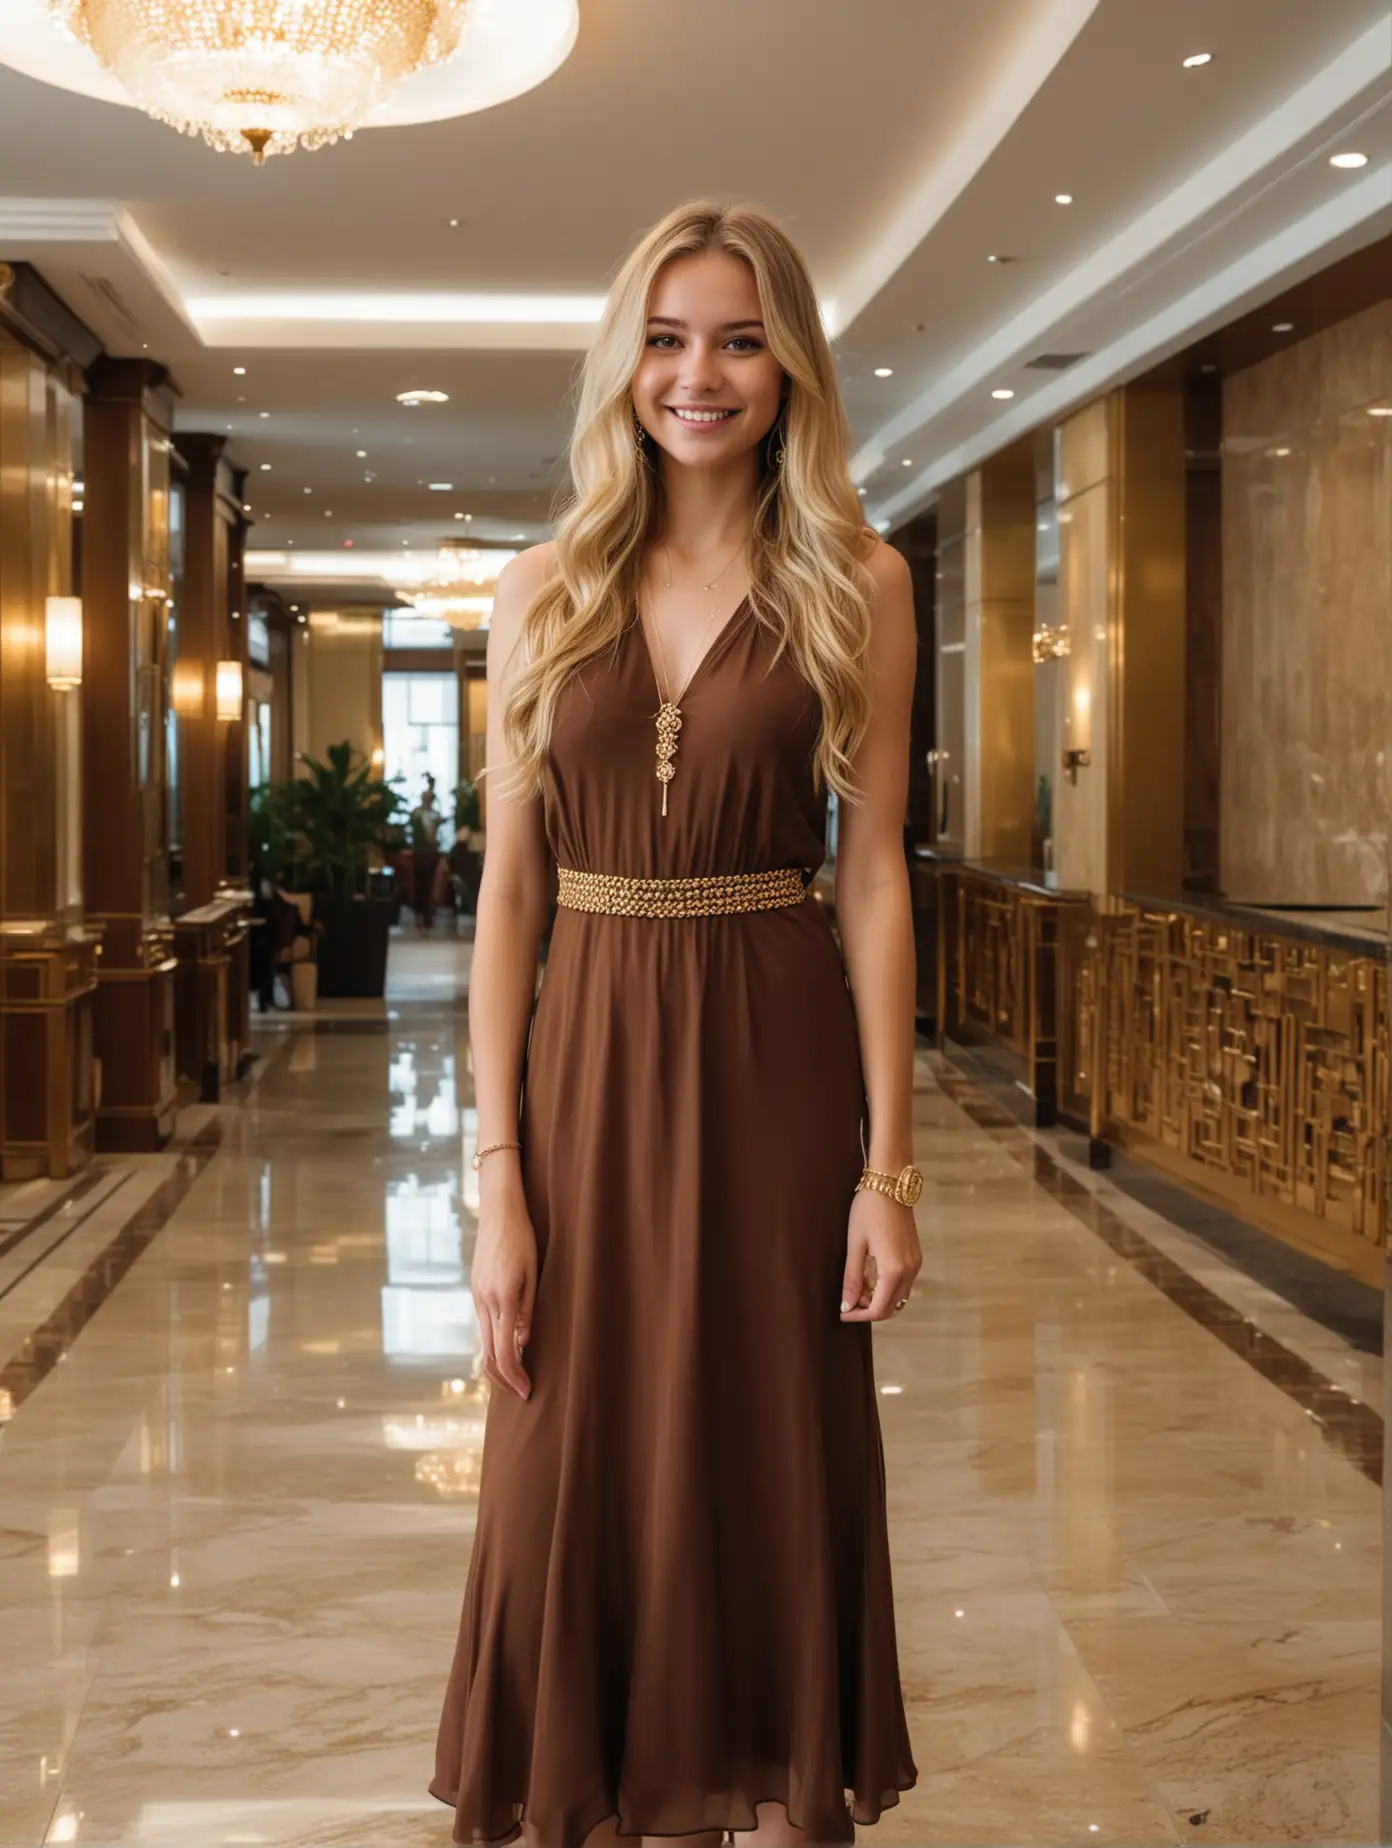 A beautiful long-haired blonde girl, smiling, wearing an elegant dark brown dress and gold jewelry, stands in the lobby of a tourist hotel in Hong Kong. She wore light makeup and looked confident. Wide-angle lens